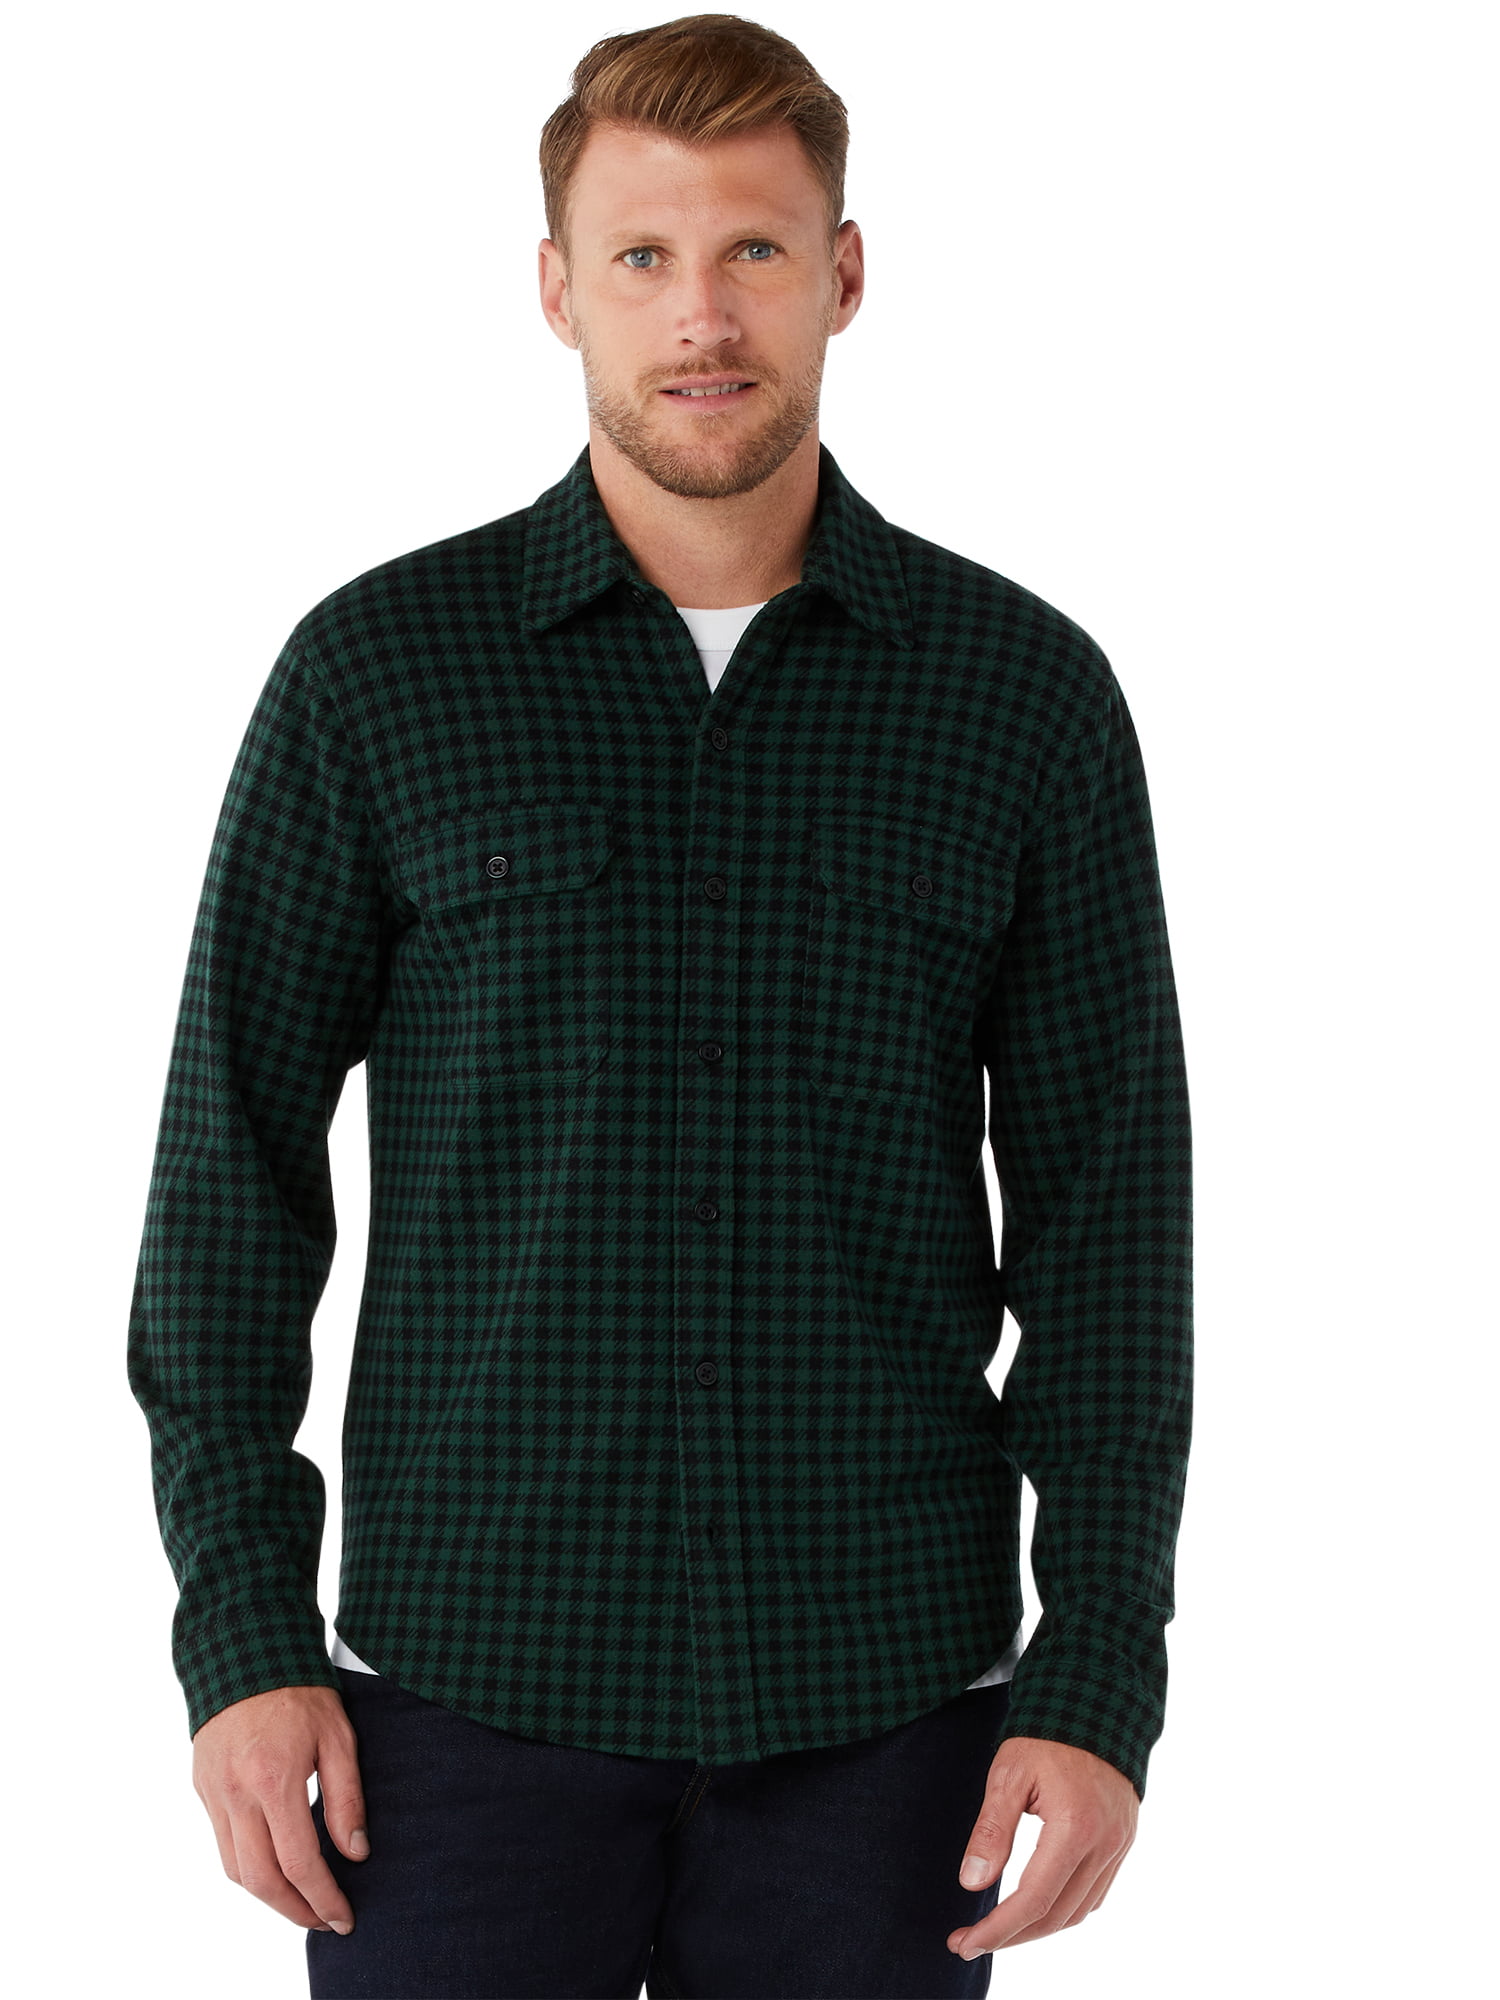 Free Assembly - Free Assembly Men's Soft Knit Flannel Shirt with Double ...